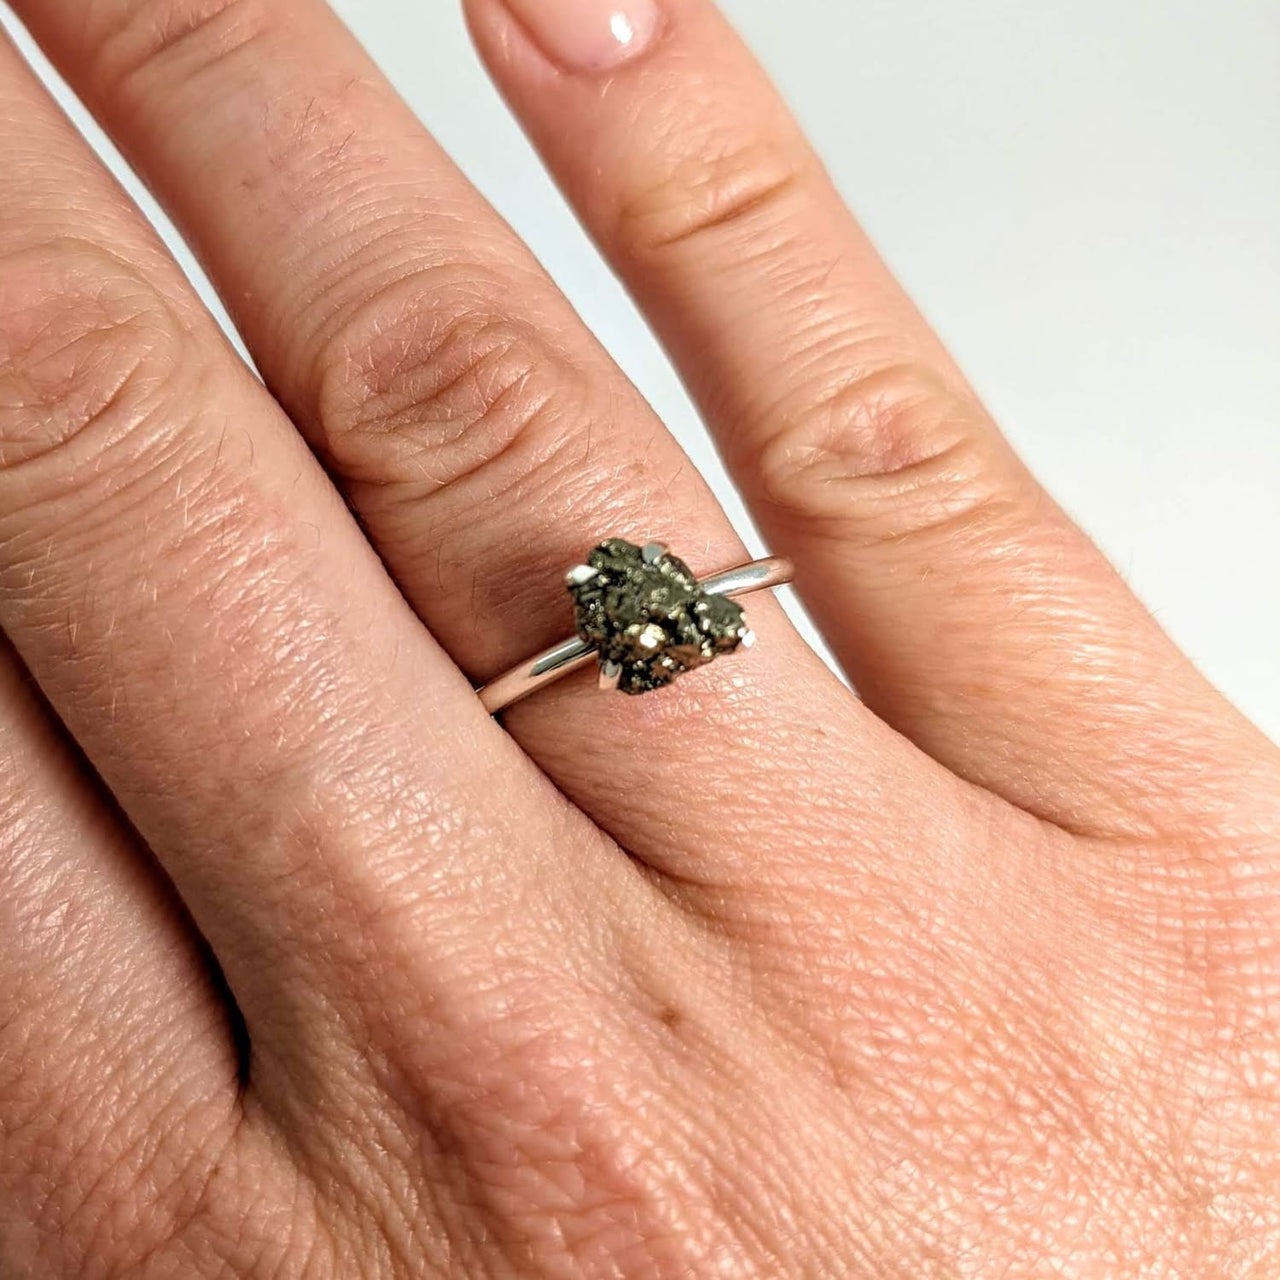 1 Pyrite Crystal Stackable Dainty Ring.925 Sterling Silver 